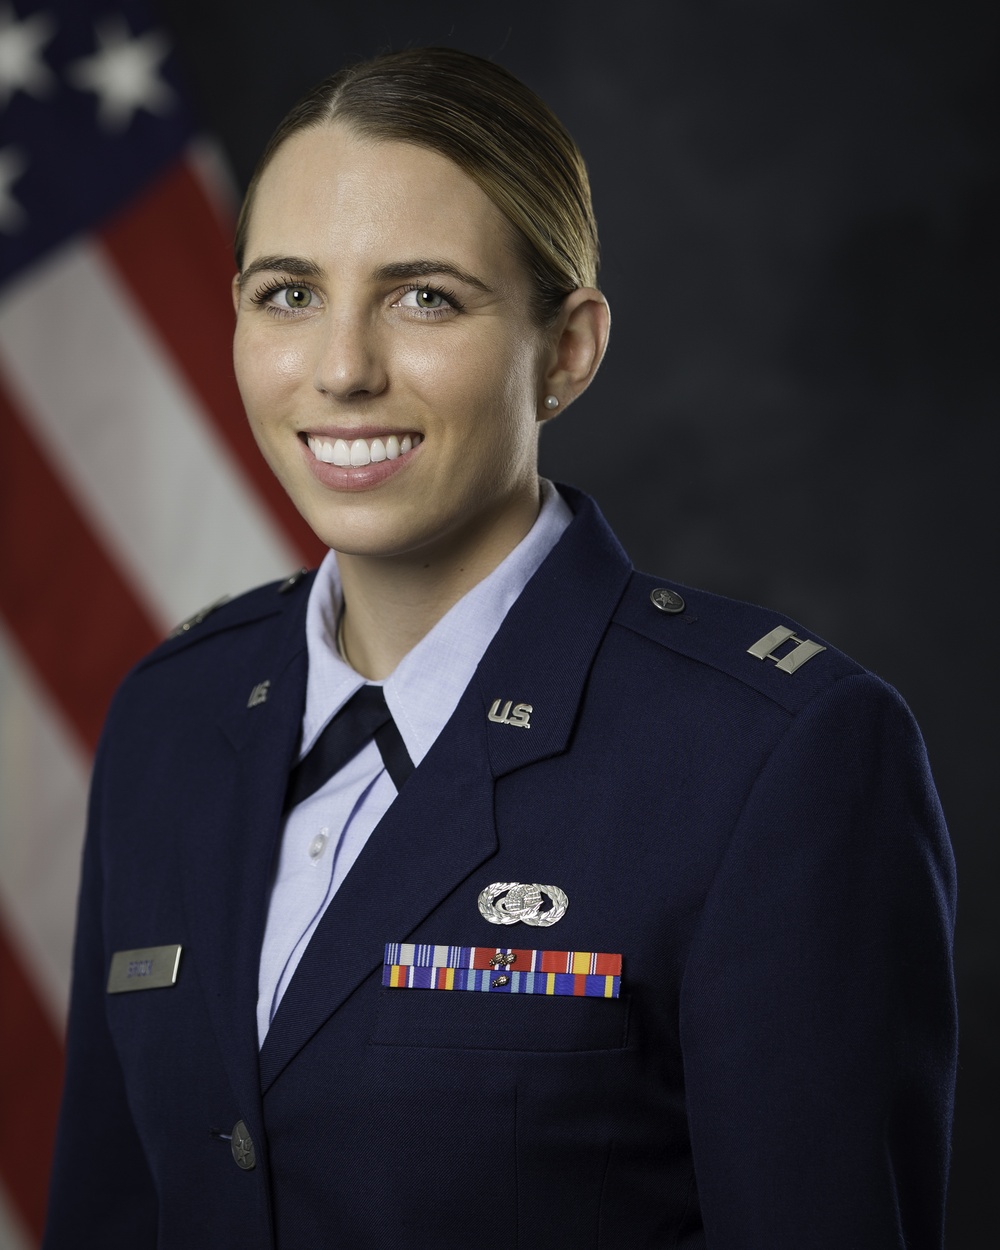 Official portrait of Officer-in-Charge of Ceremonies and Protocol, Air Force District Washington, Capt. Katherine J. Brock, US Air Force